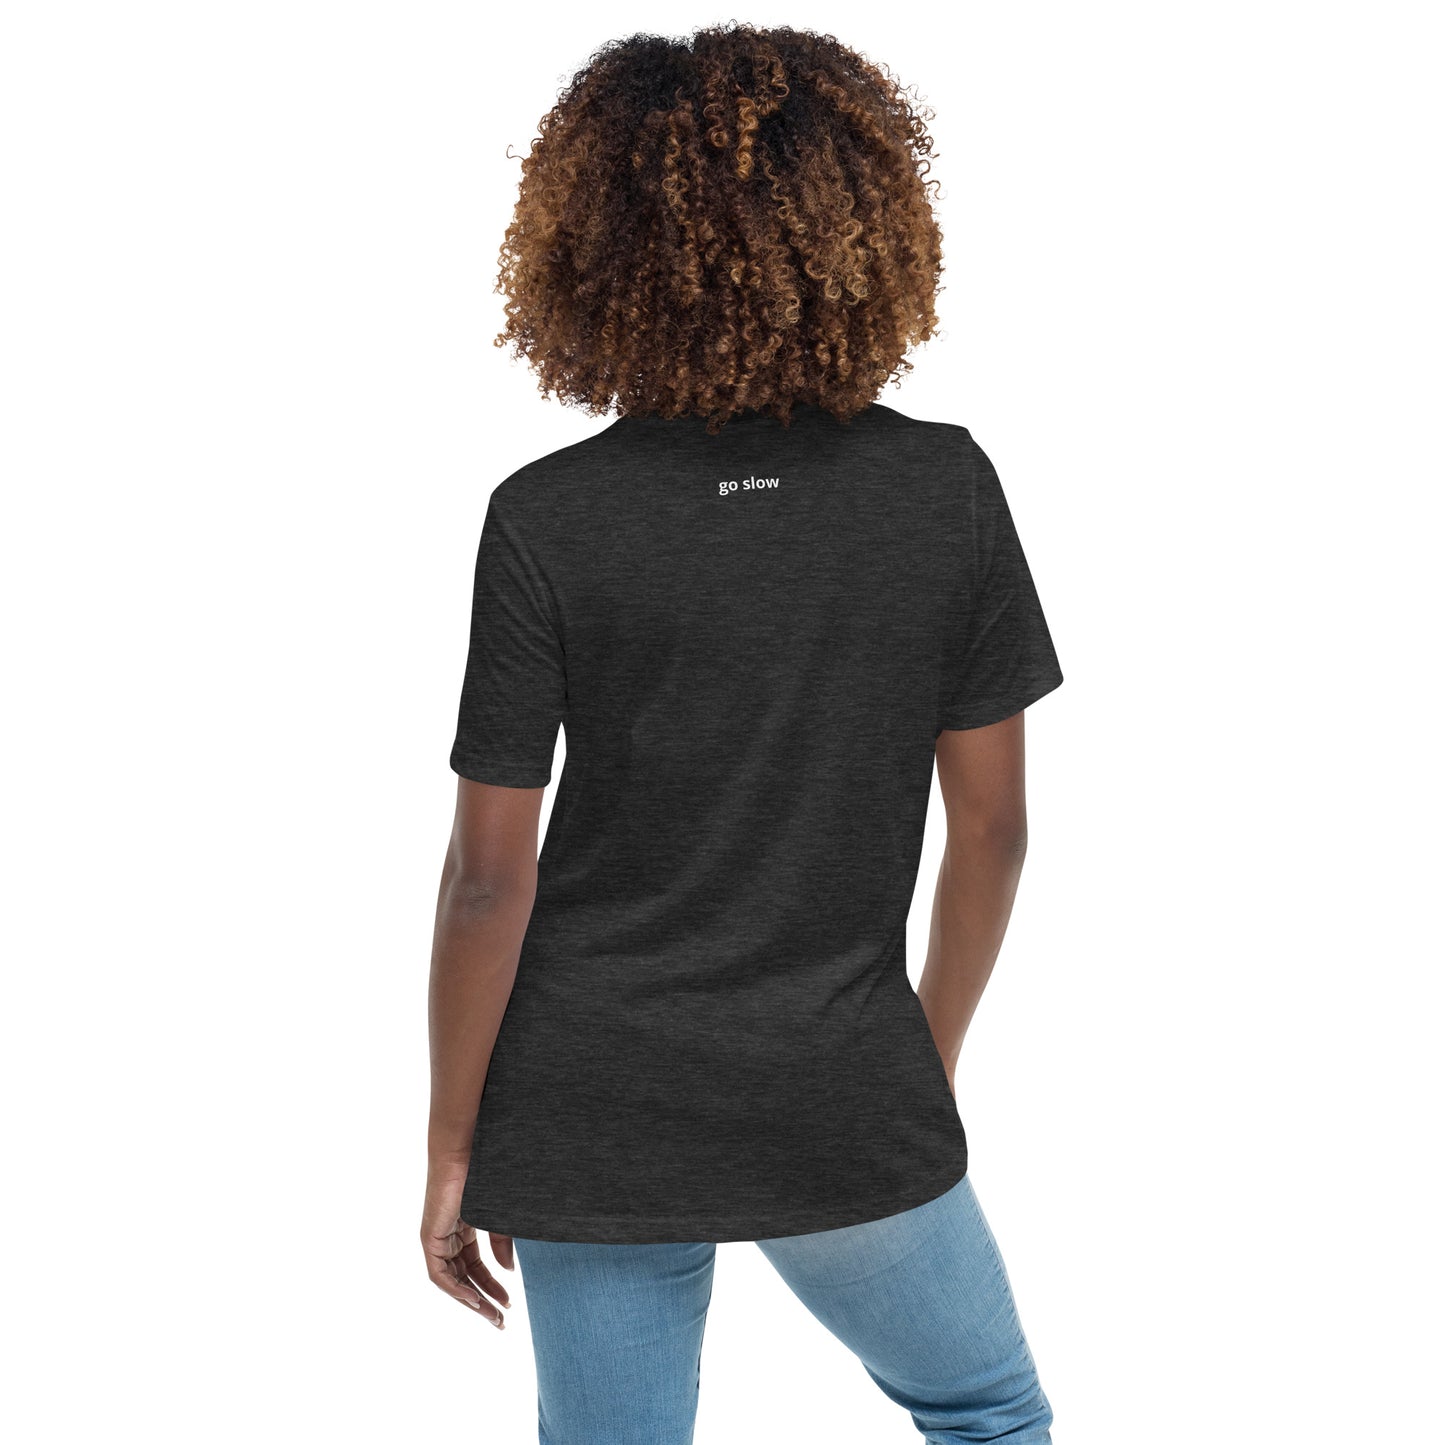 "go slow" Womens Relaxed Tee